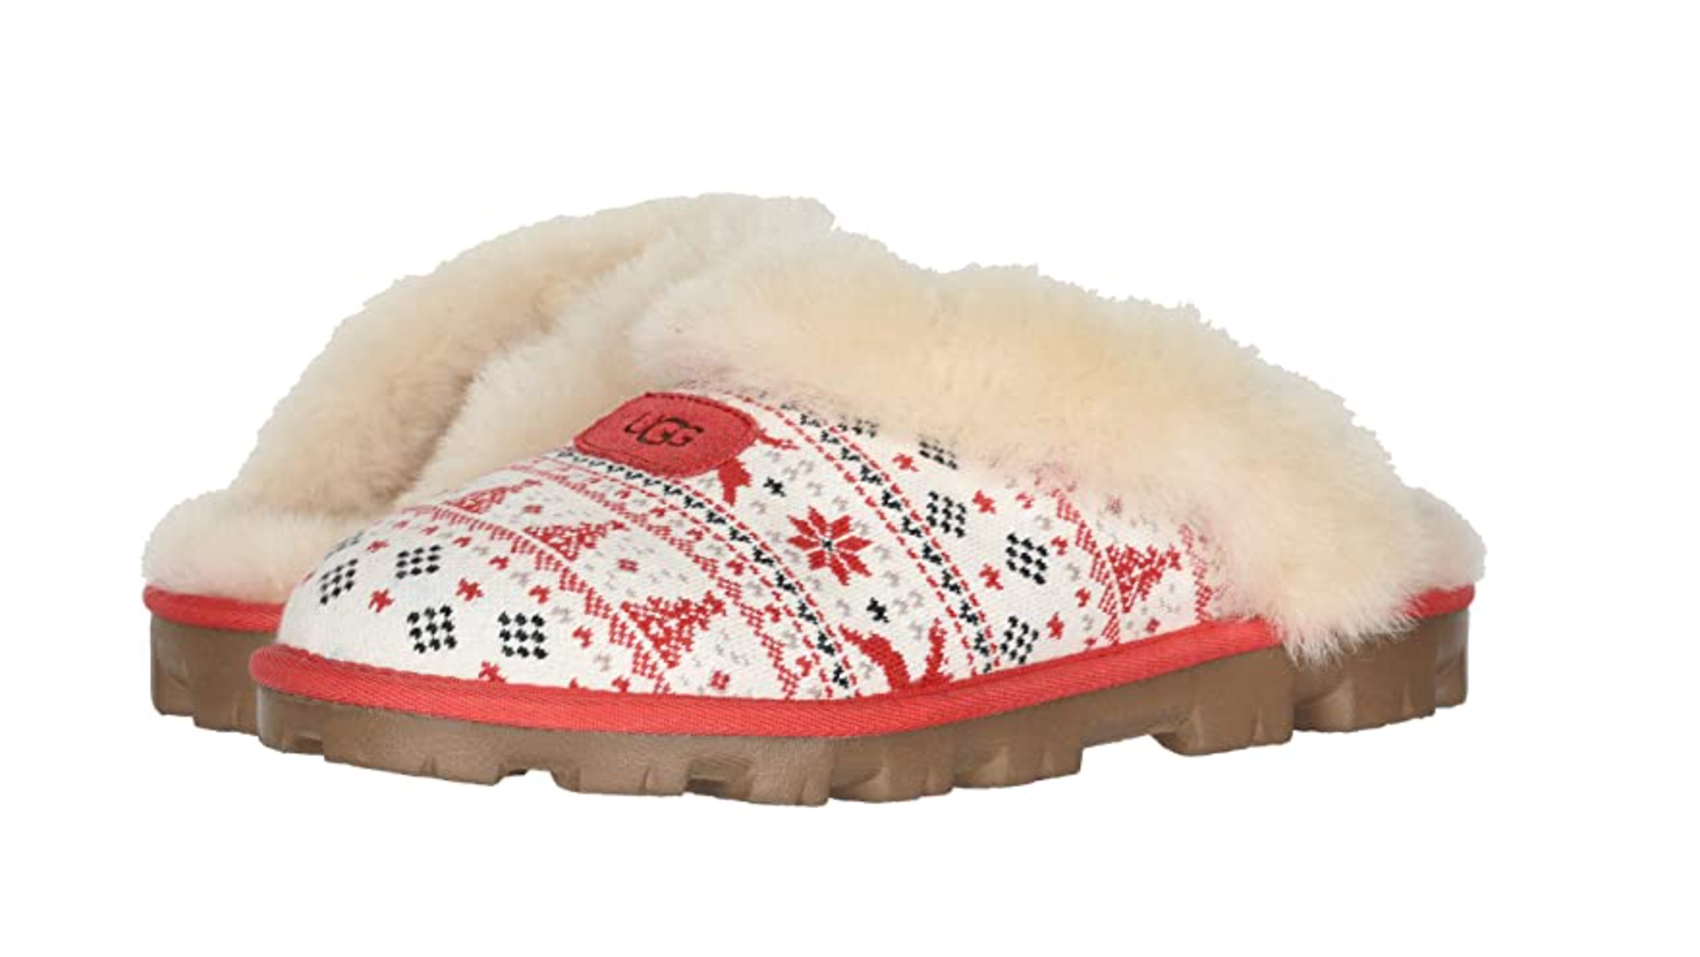 ugg slippers thick sole